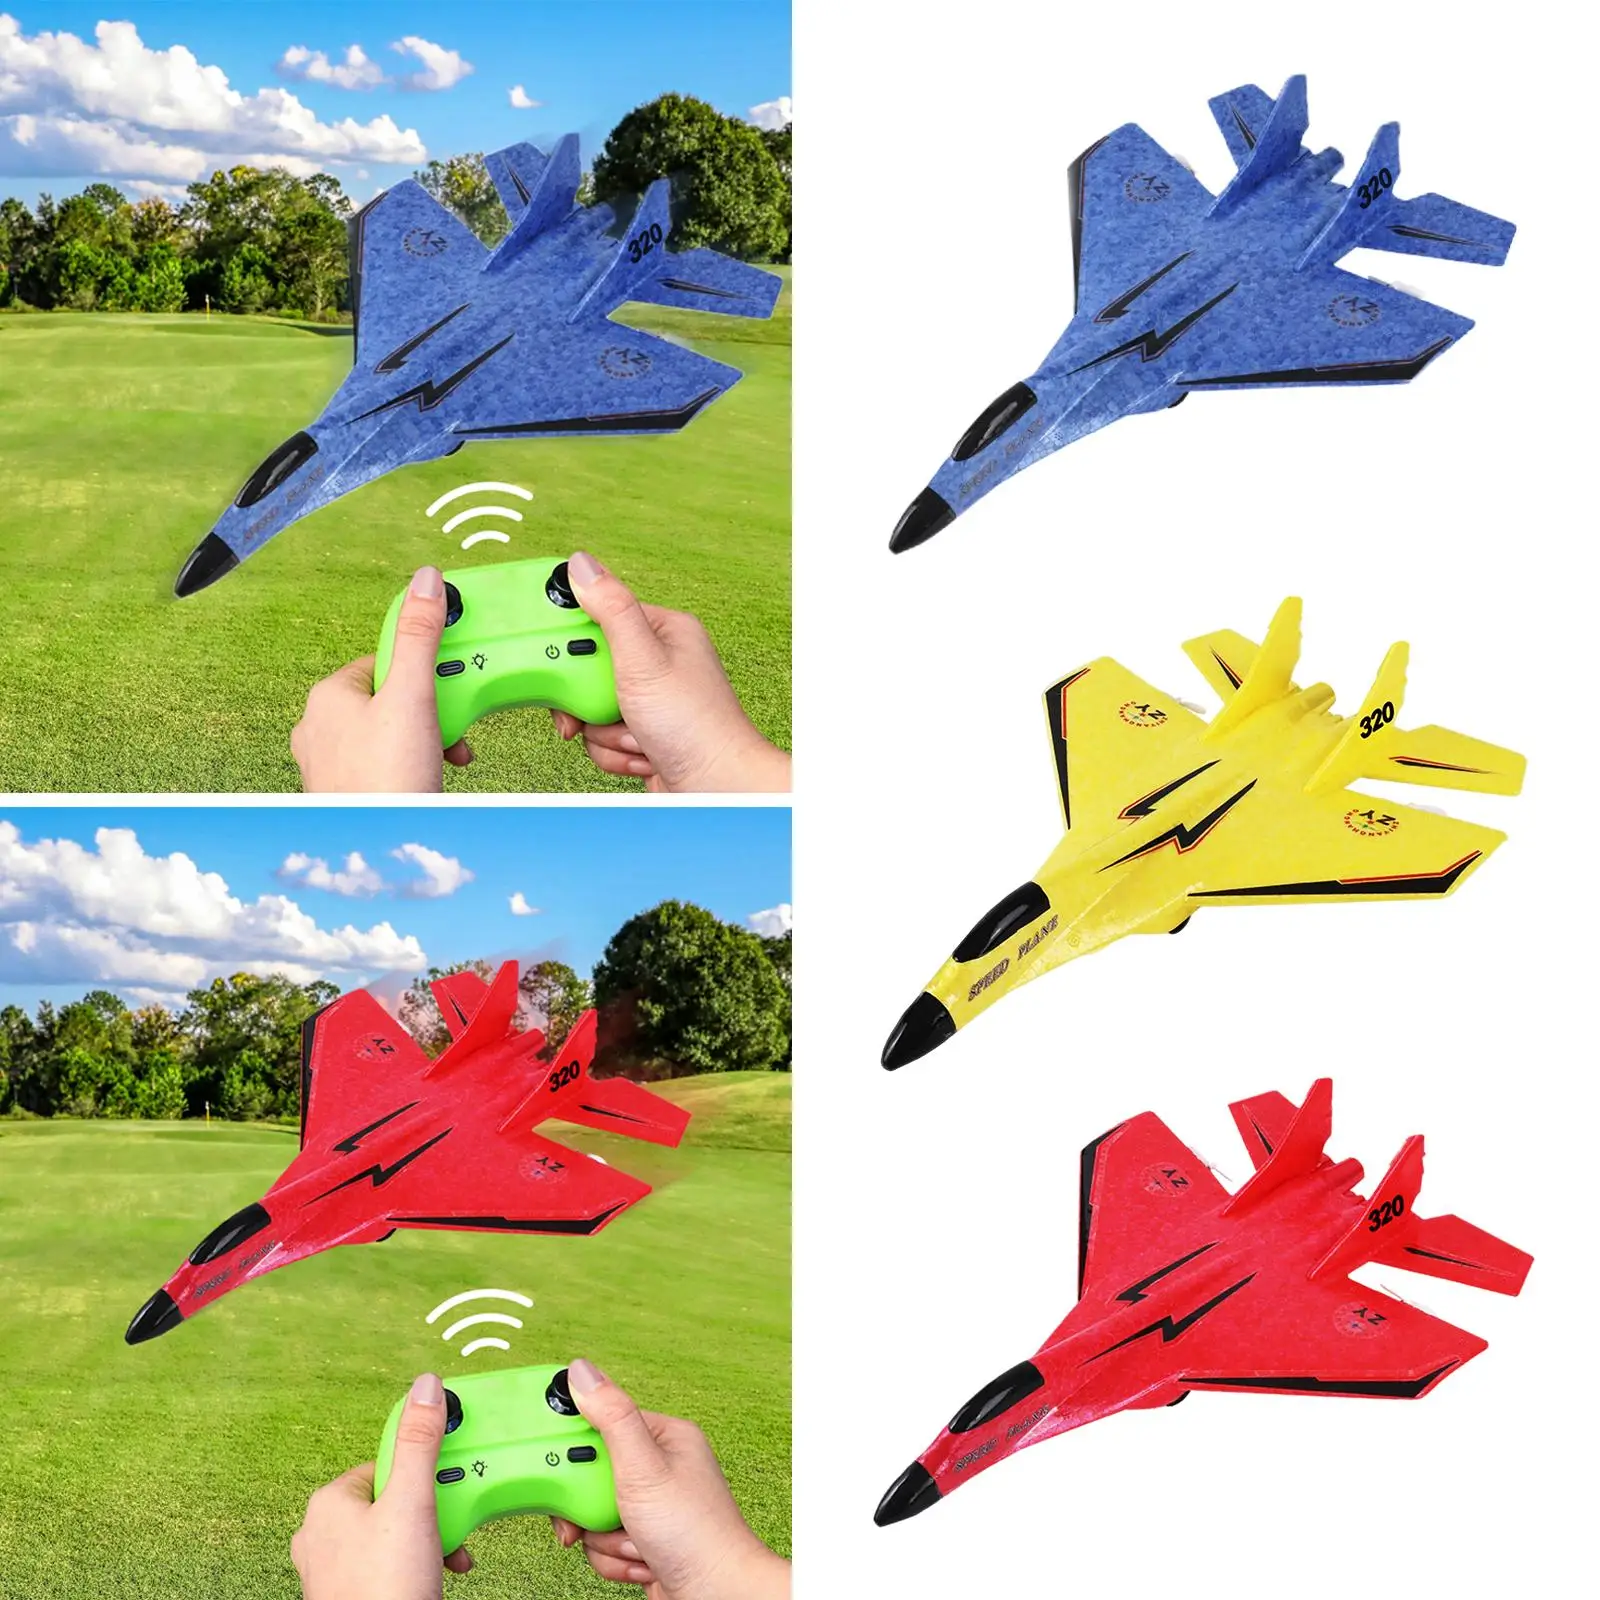 2 Plane Ready to Fly Outdooring Toys Gift Easy to Fly Aircraft Jet RC Glider for Boys Girls Kids Adults Beginner